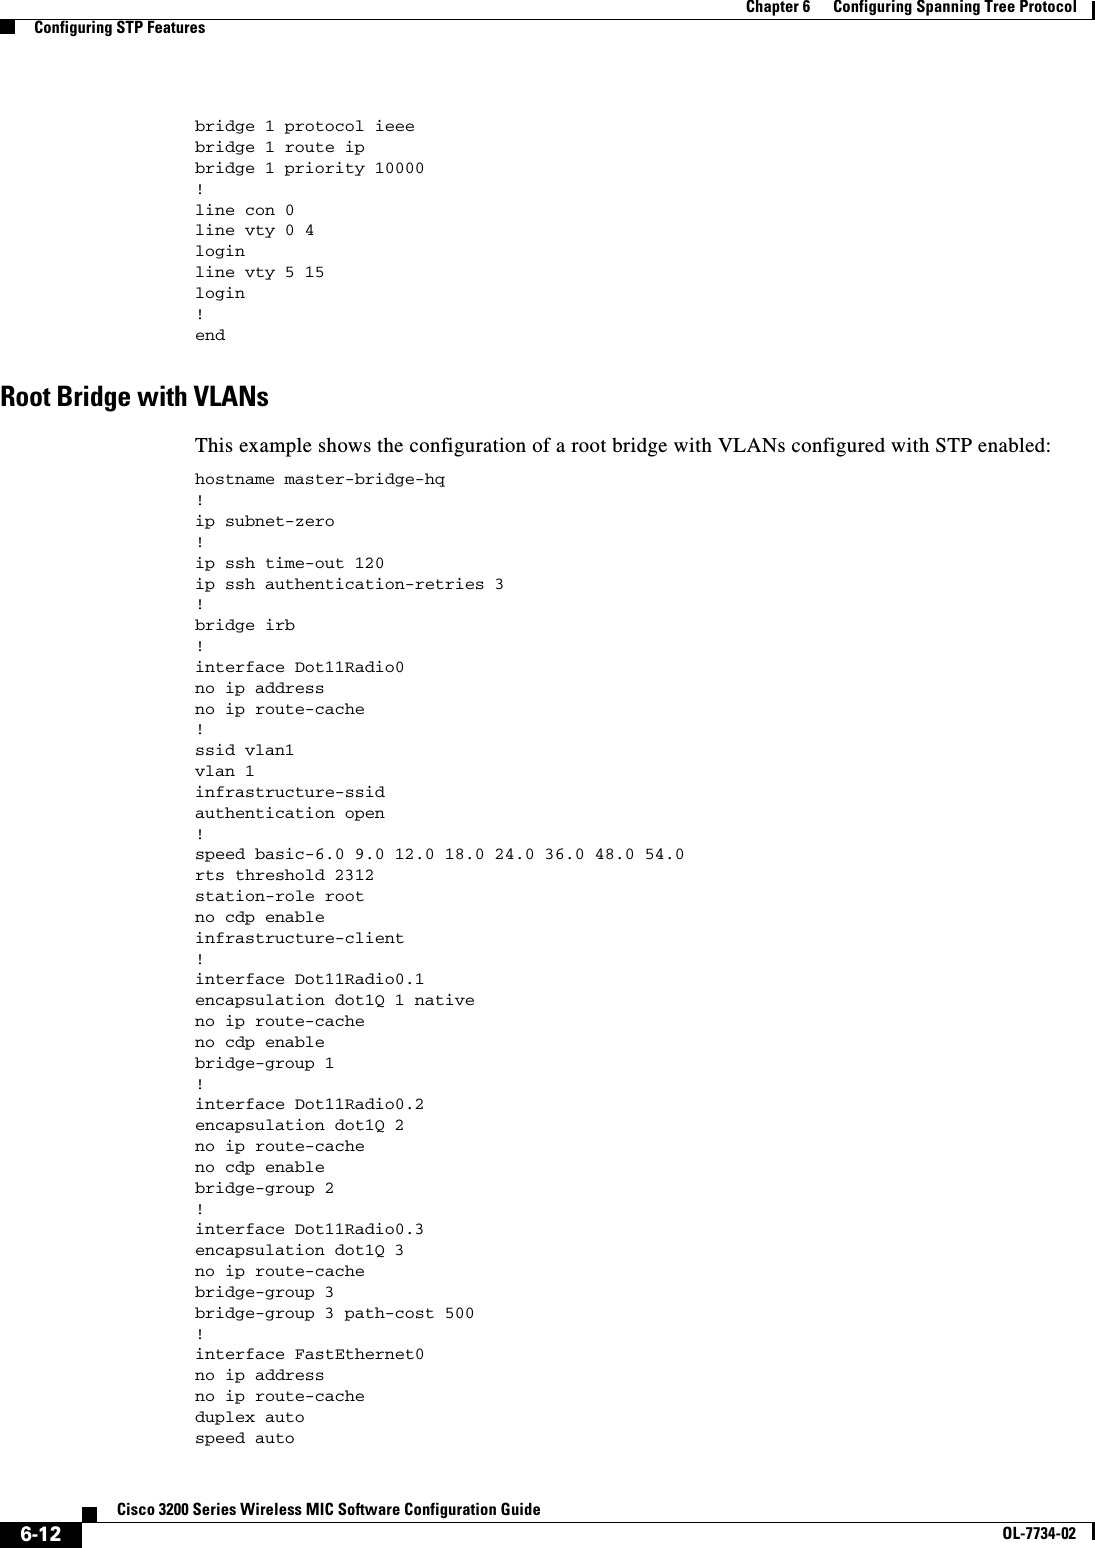 6-12Cisco 3200 Series Wireless MIC Software Configuration GuideOL-7734-02Chapter 6      Configuring Spanning Tree ProtocolConfiguring STP Featuresbridge 1 protocol ieeebridge 1 route ipbridge 1 priority 10000!line con 0line vty 0 4loginline vty 5 15login!endRoot Bridge with VLANsThis example shows the configuration of a root bridge with VLANs configured with STP enabled:hostname master-bridge-hq!ip subnet-zero!ip ssh time-out 120ip ssh authentication-retries 3!bridge irb!interface Dot11Radio0no ip addressno ip route-cache!ssid vlan1vlan 1infrastructure-ssidauthentication open !speed basic-6.0 9.0 12.0 18.0 24.0 36.0 48.0 54.0rts threshold 2312station-role rootno cdp enableinfrastructure-client!interface Dot11Radio0.1encapsulation dot1Q 1 nativeno ip route-cacheno cdp enablebridge-group 1!interface Dot11Radio0.2encapsulation dot1Q 2no ip route-cacheno cdp enablebridge-group 2!interface Dot11Radio0.3encapsulation dot1Q 3no ip route-cachebridge-group 3bridge-group 3 path-cost 500!interface FastEthernet0no ip addressno ip route-cacheduplex autospeed auto